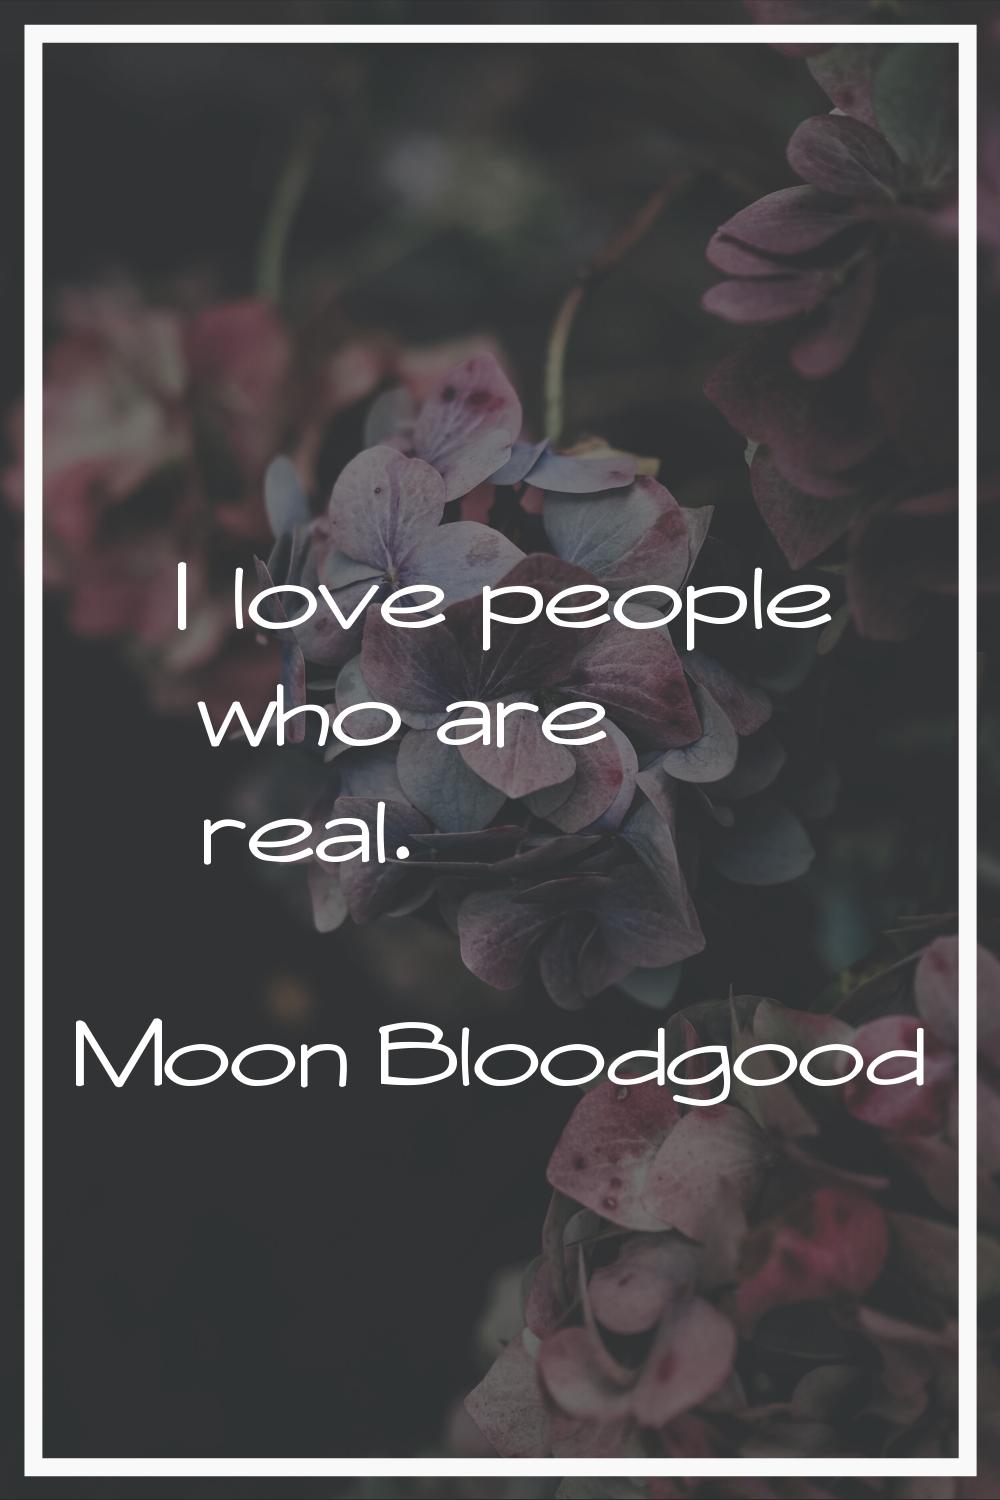 I love people who are real.